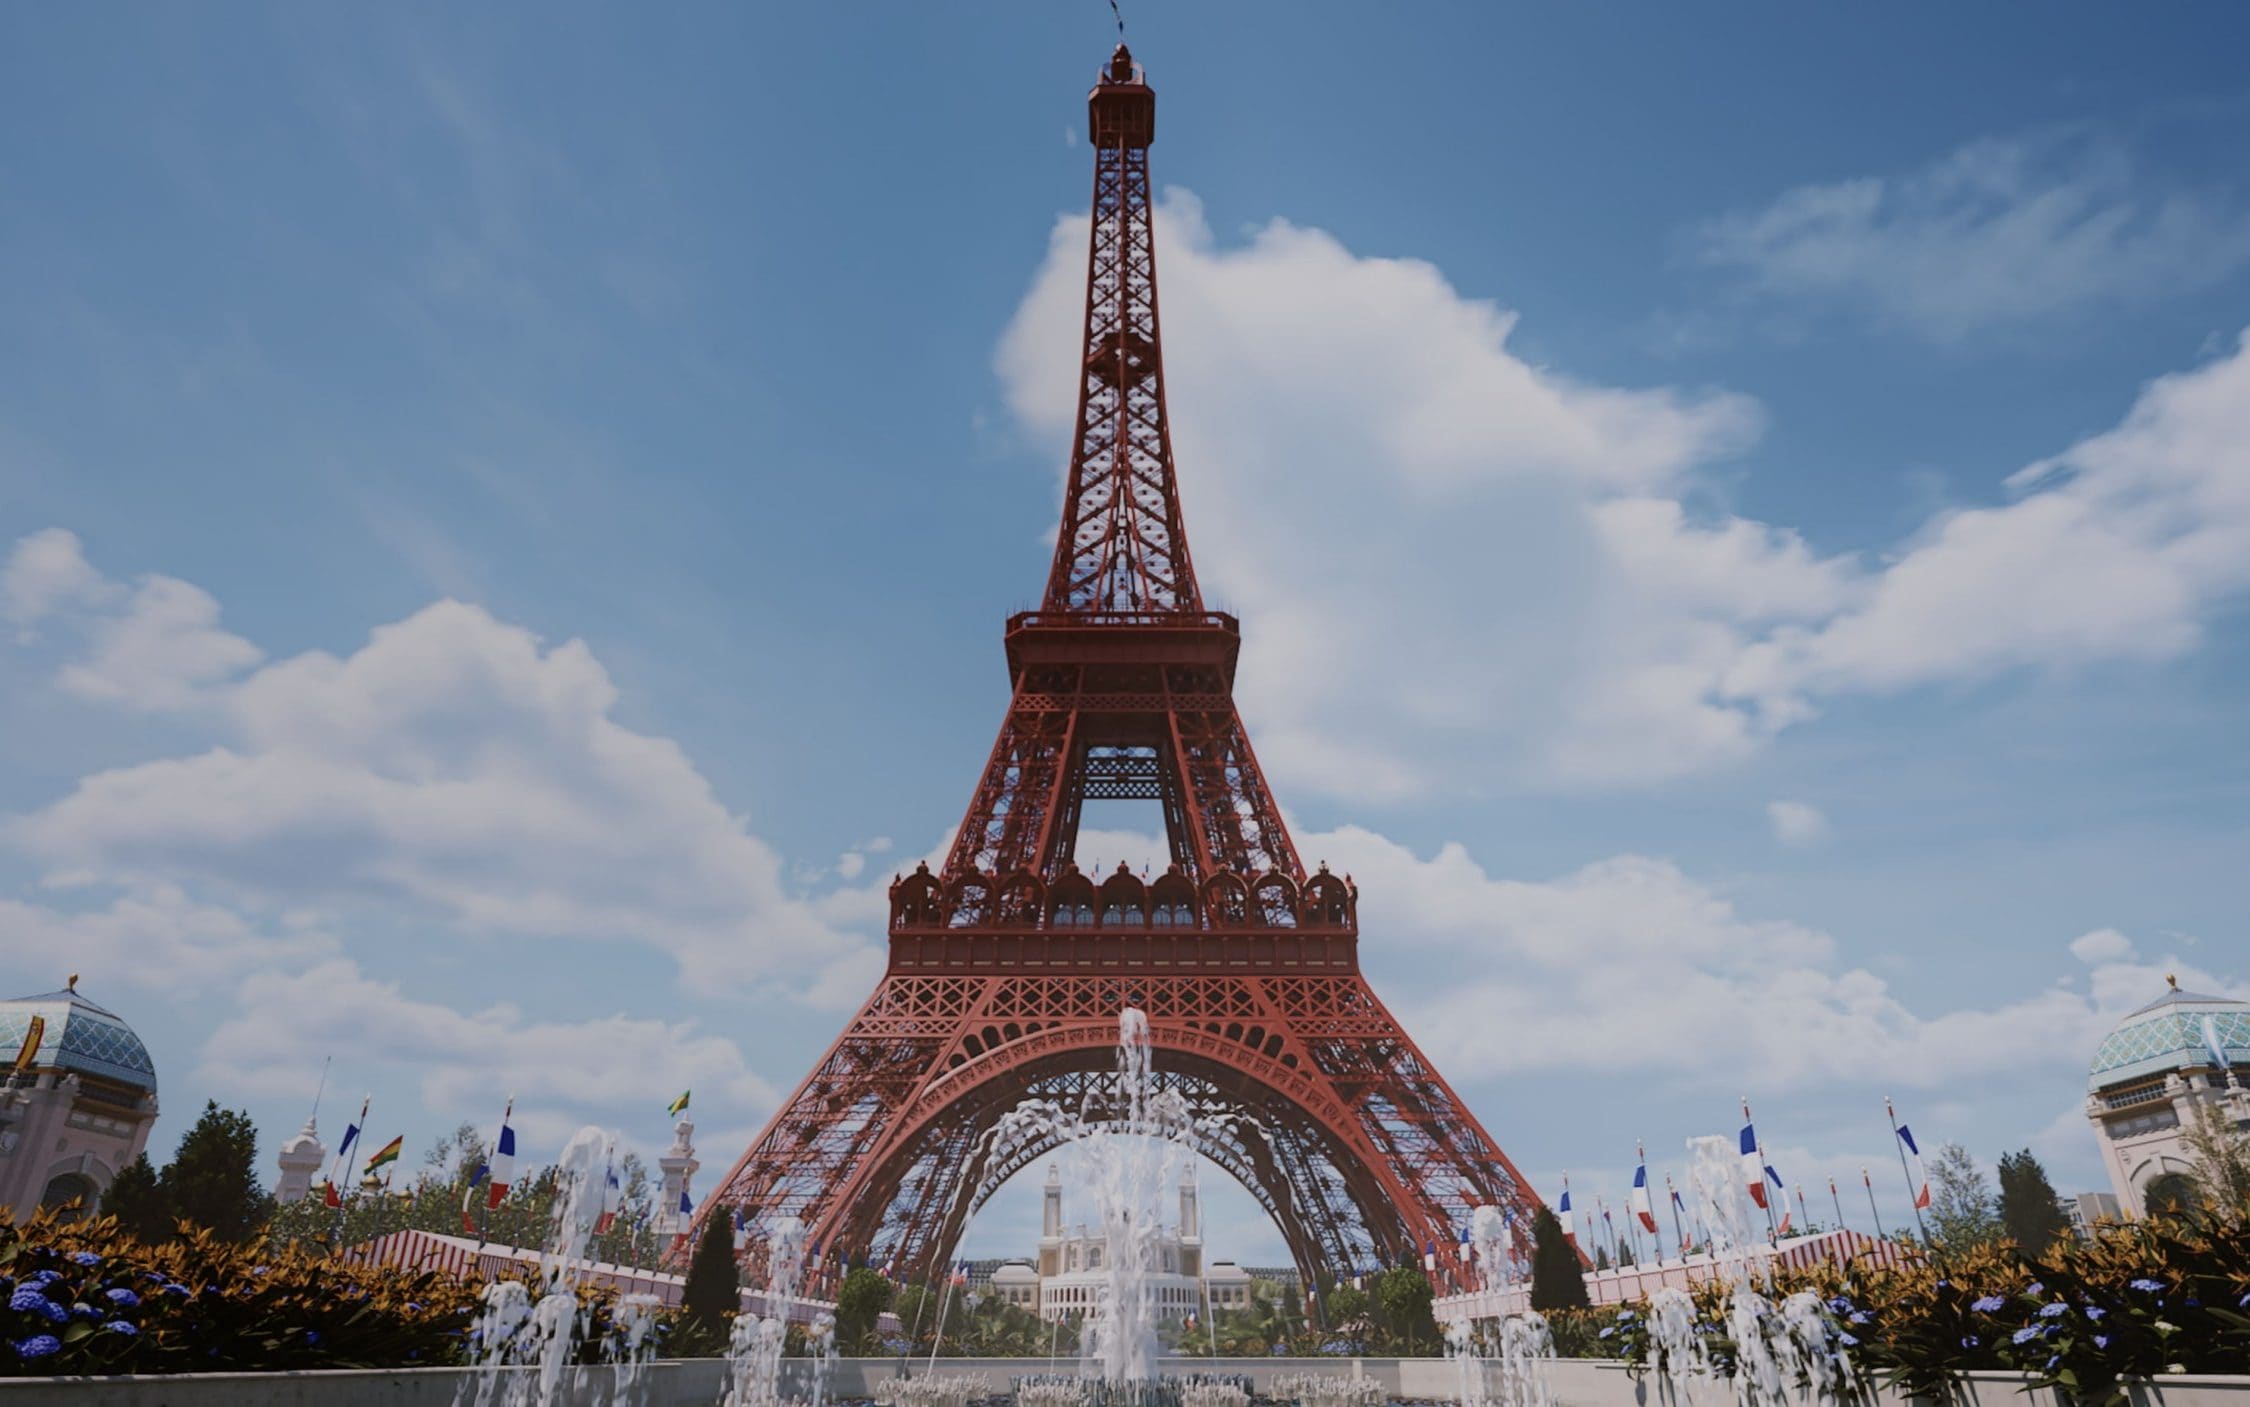 What’s on TV tonight: Eiffel Tower: Building the Impossible, House of the Dragon, and more